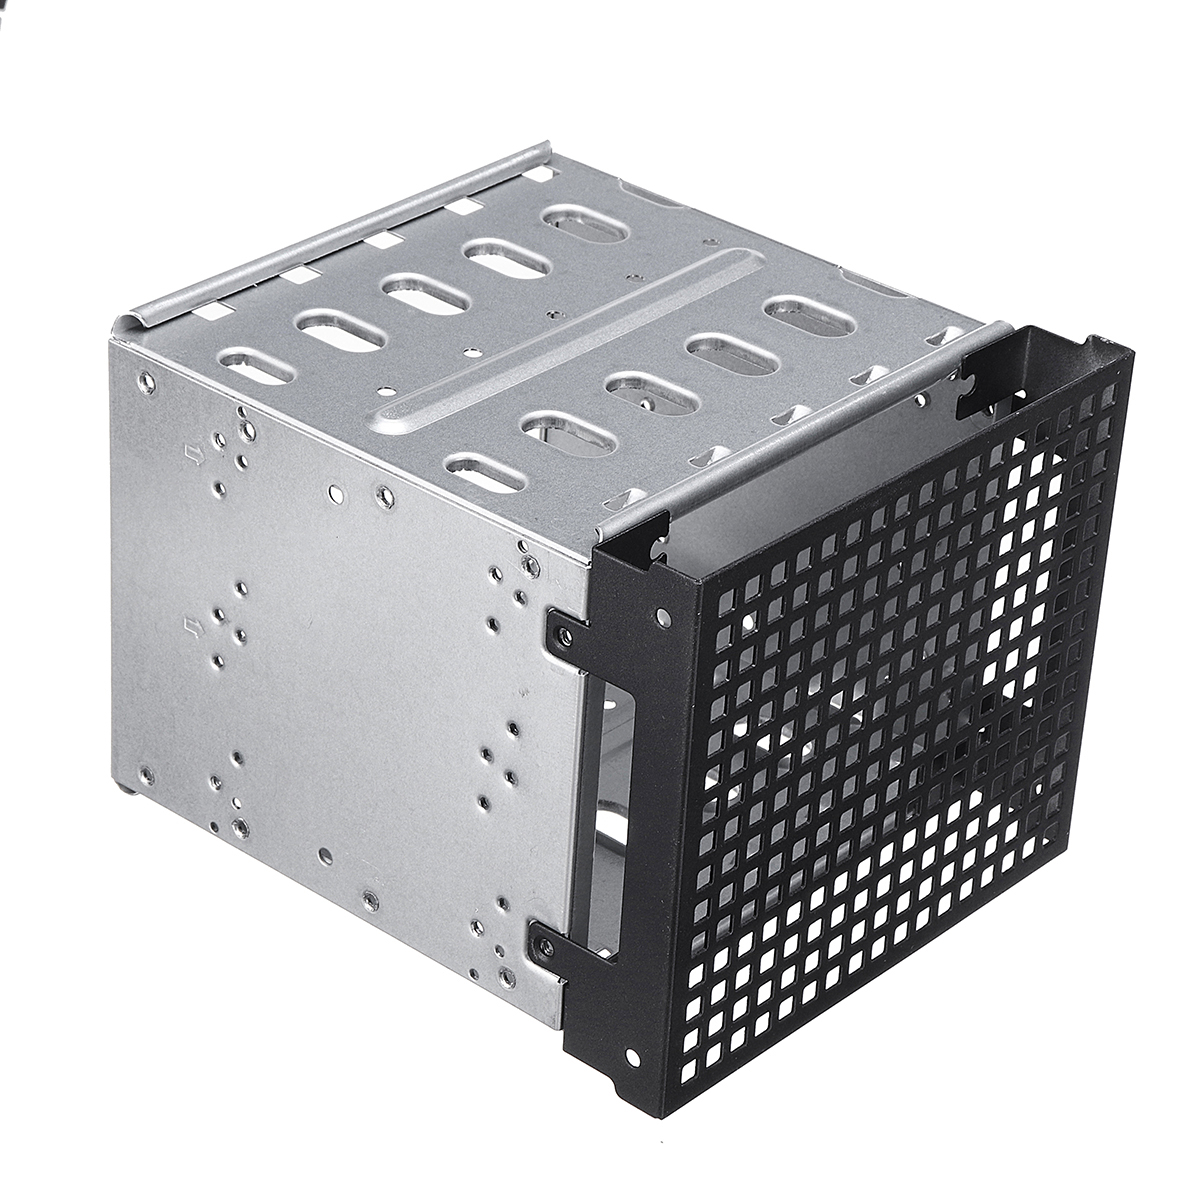 5.25" to 5x 3.5" SATA SAS HDD Cage Rack Hard Drive Tray Caddy Converter with Fan Space 45